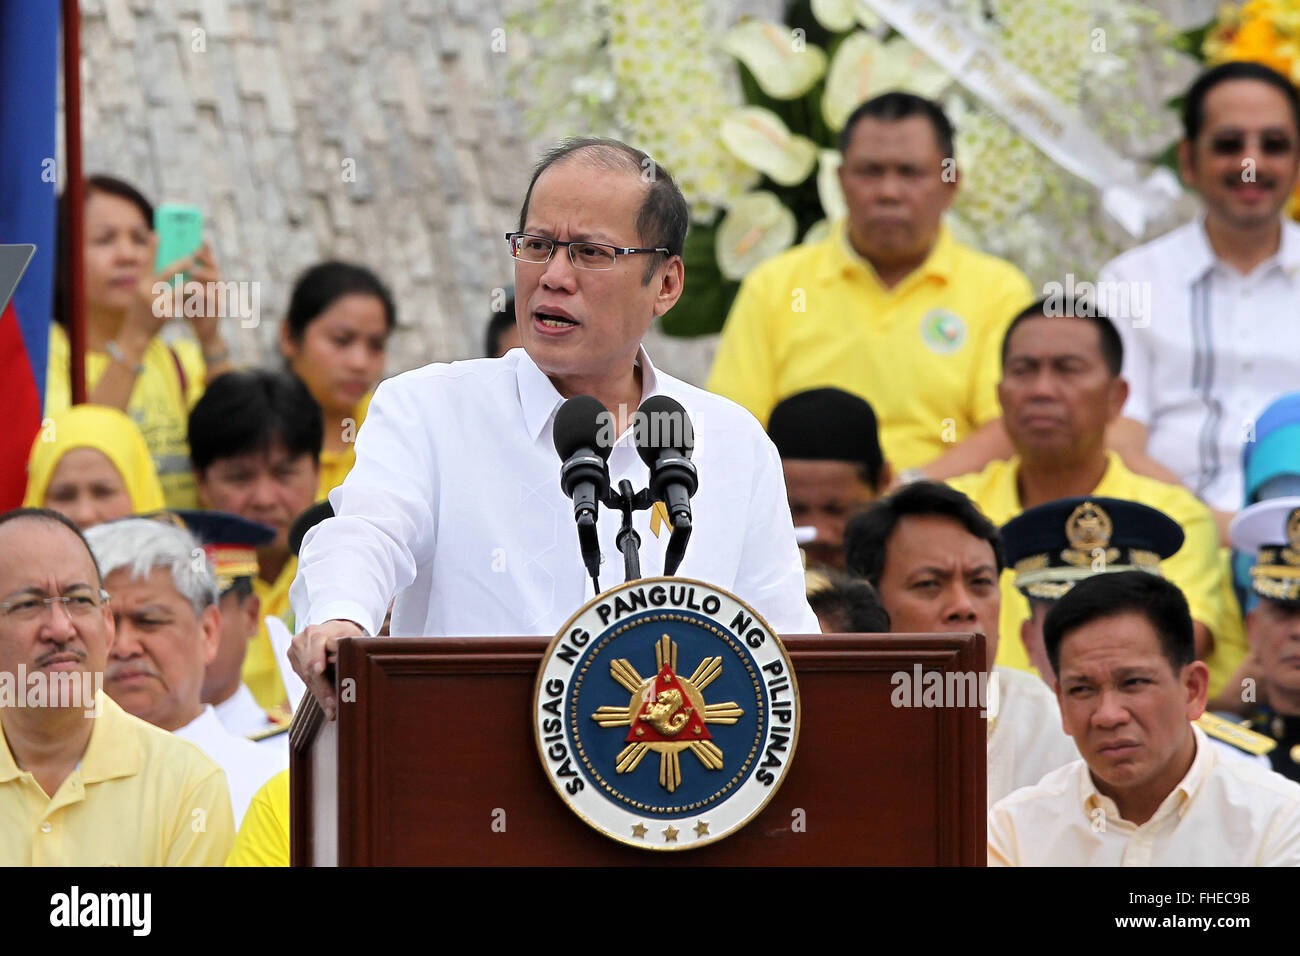 Quezon City, Philippines. 25th Feb, 2016. Philippine President Benigno S. Aquino III speaks during the 30th anniversary of the People Power Revolution in Quezon City, the Philippines, Feb. 25, 2016. Filipinos on Thursday celebrated the 30th anniversary of the People Power Revolution, an event that toppled the dictatorship of former President Ferdinand Marcos in 1986. Credit:  Rouelle Umali/Xinhua/Alamy Live News Stock Photo